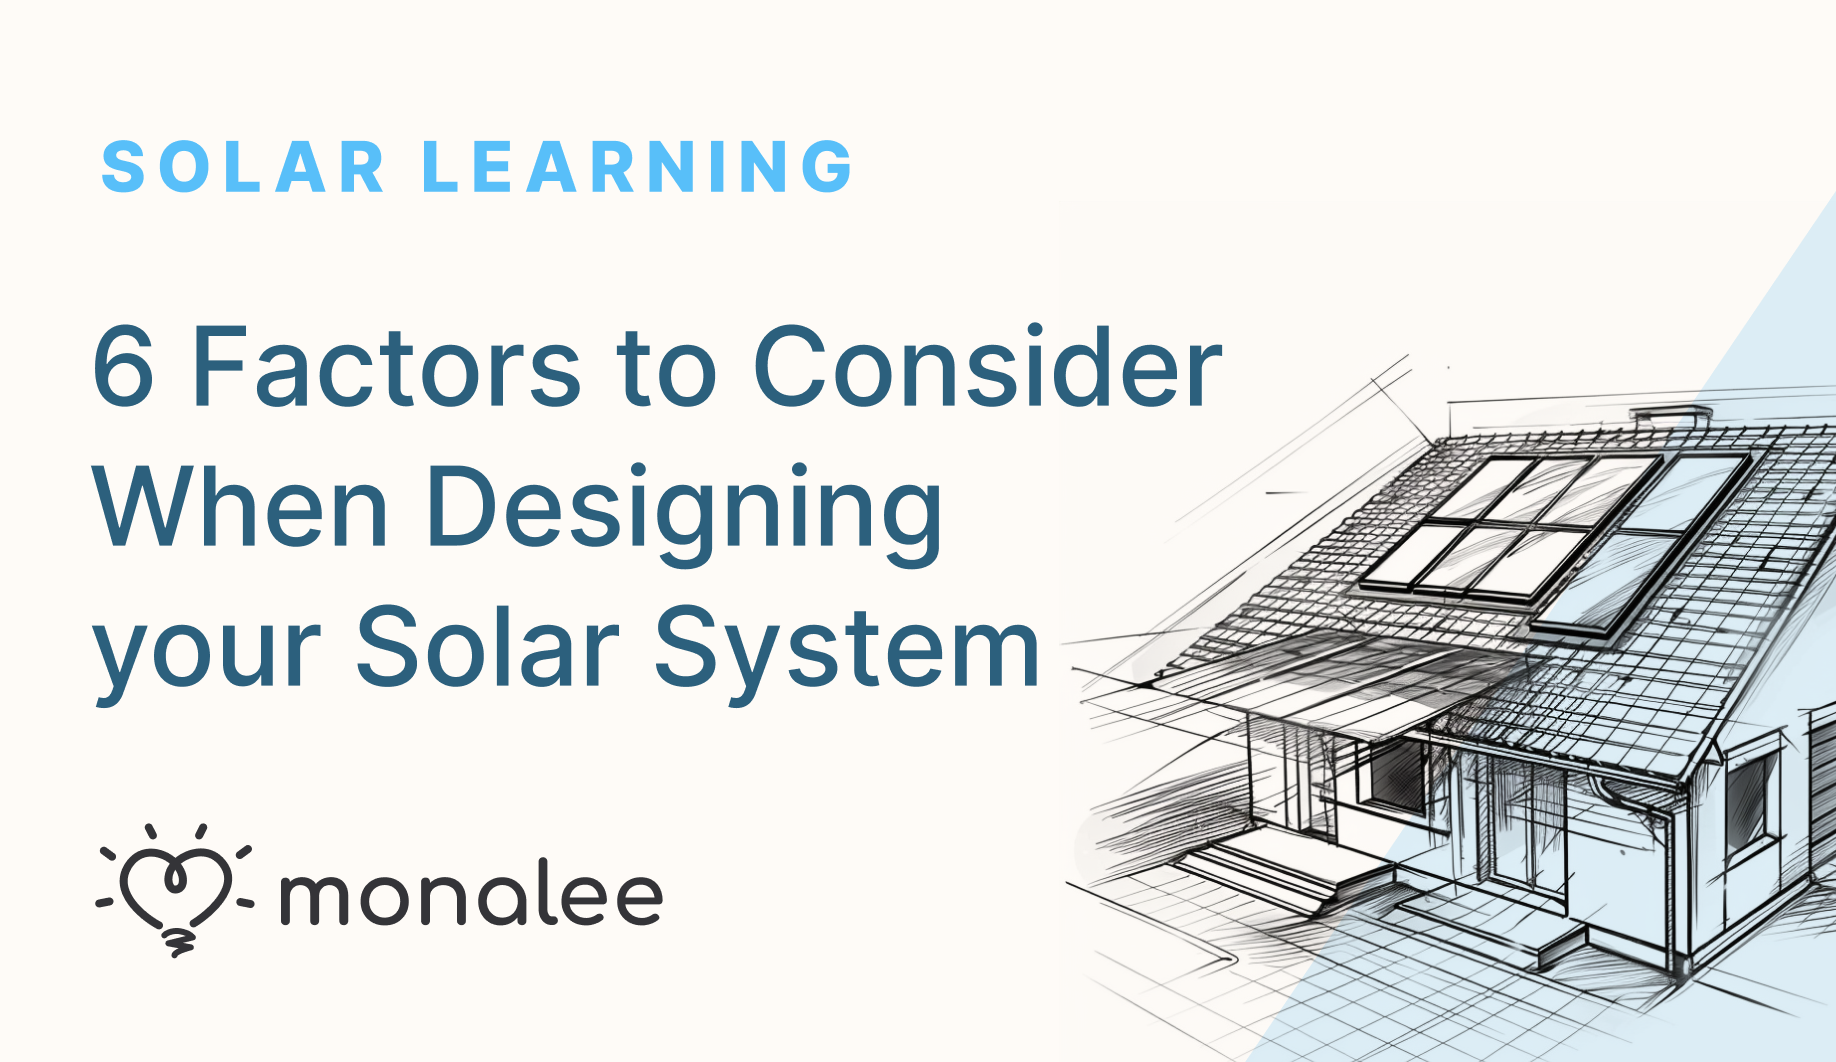 6 Factors to Consider When Designing your Solar System